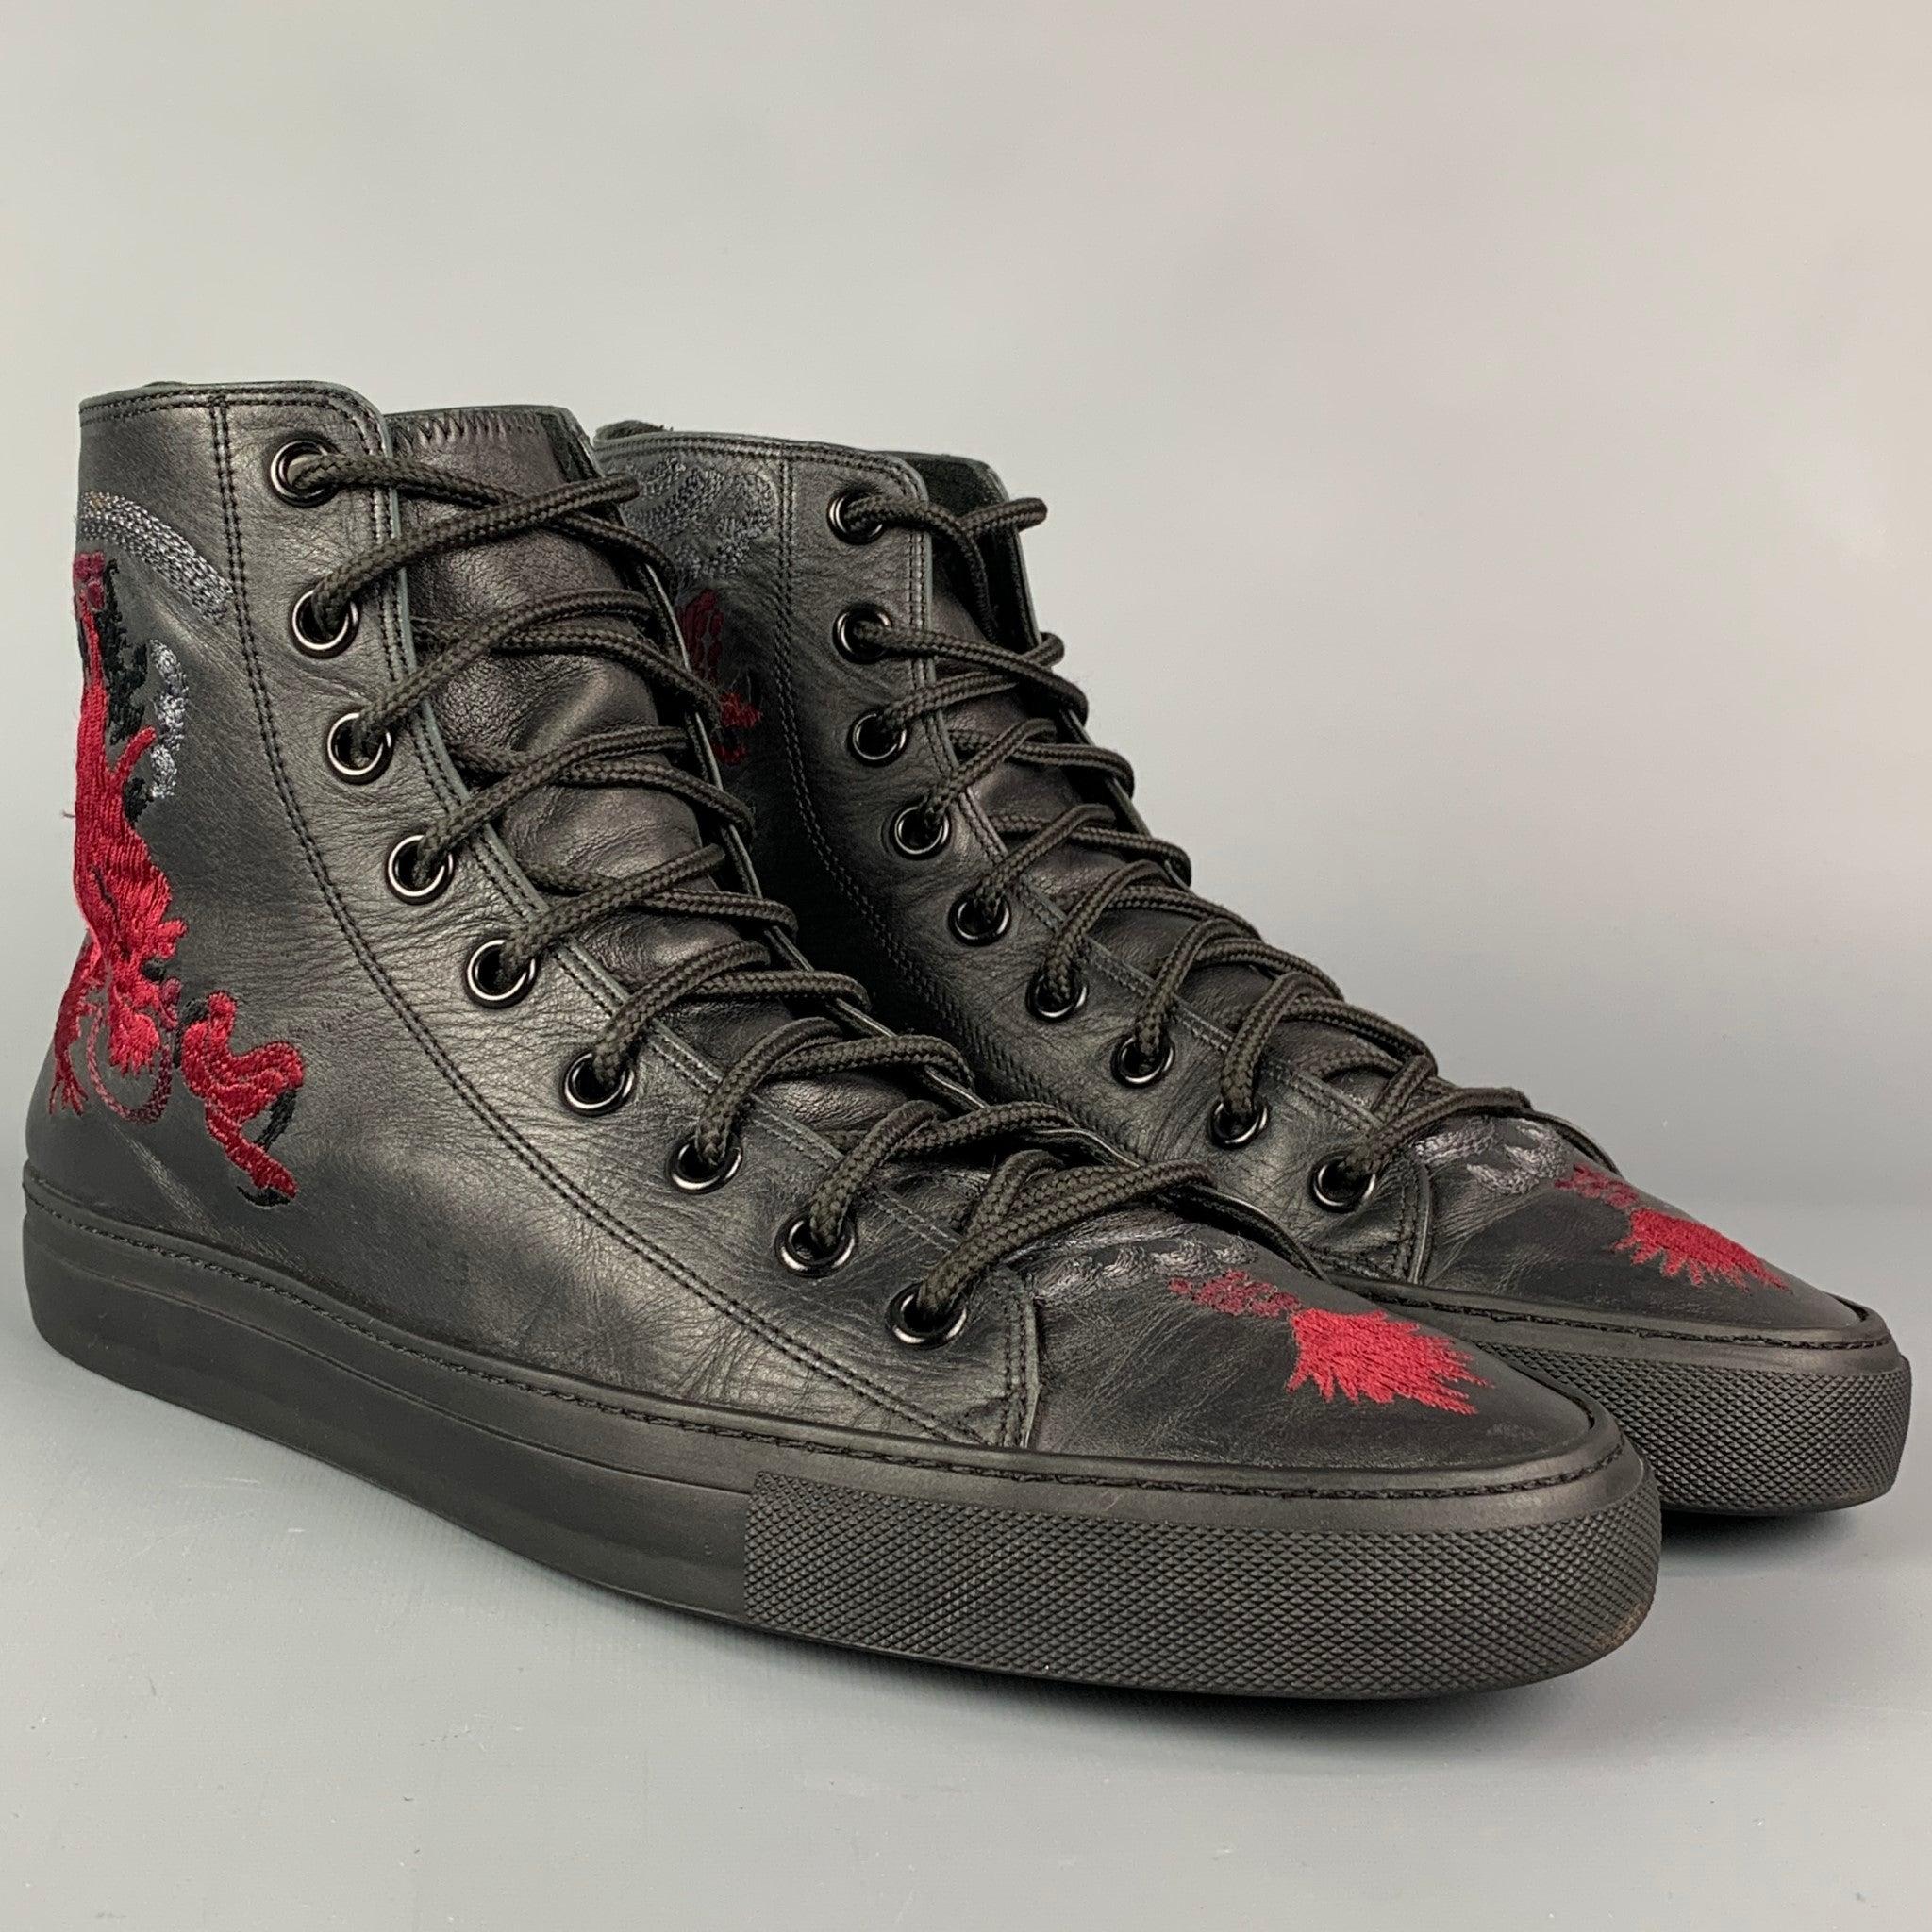 GUCCI by TOM FORD SS 2001 sneakers comes in a black & red leather with a embroidered dragon print featuring a high top style and a lace up closure. Made in Italy. Includes box.
Very Good
Pre-Owned Condition.Outsole: 12.25 inches  x 4 inches 
  
  
